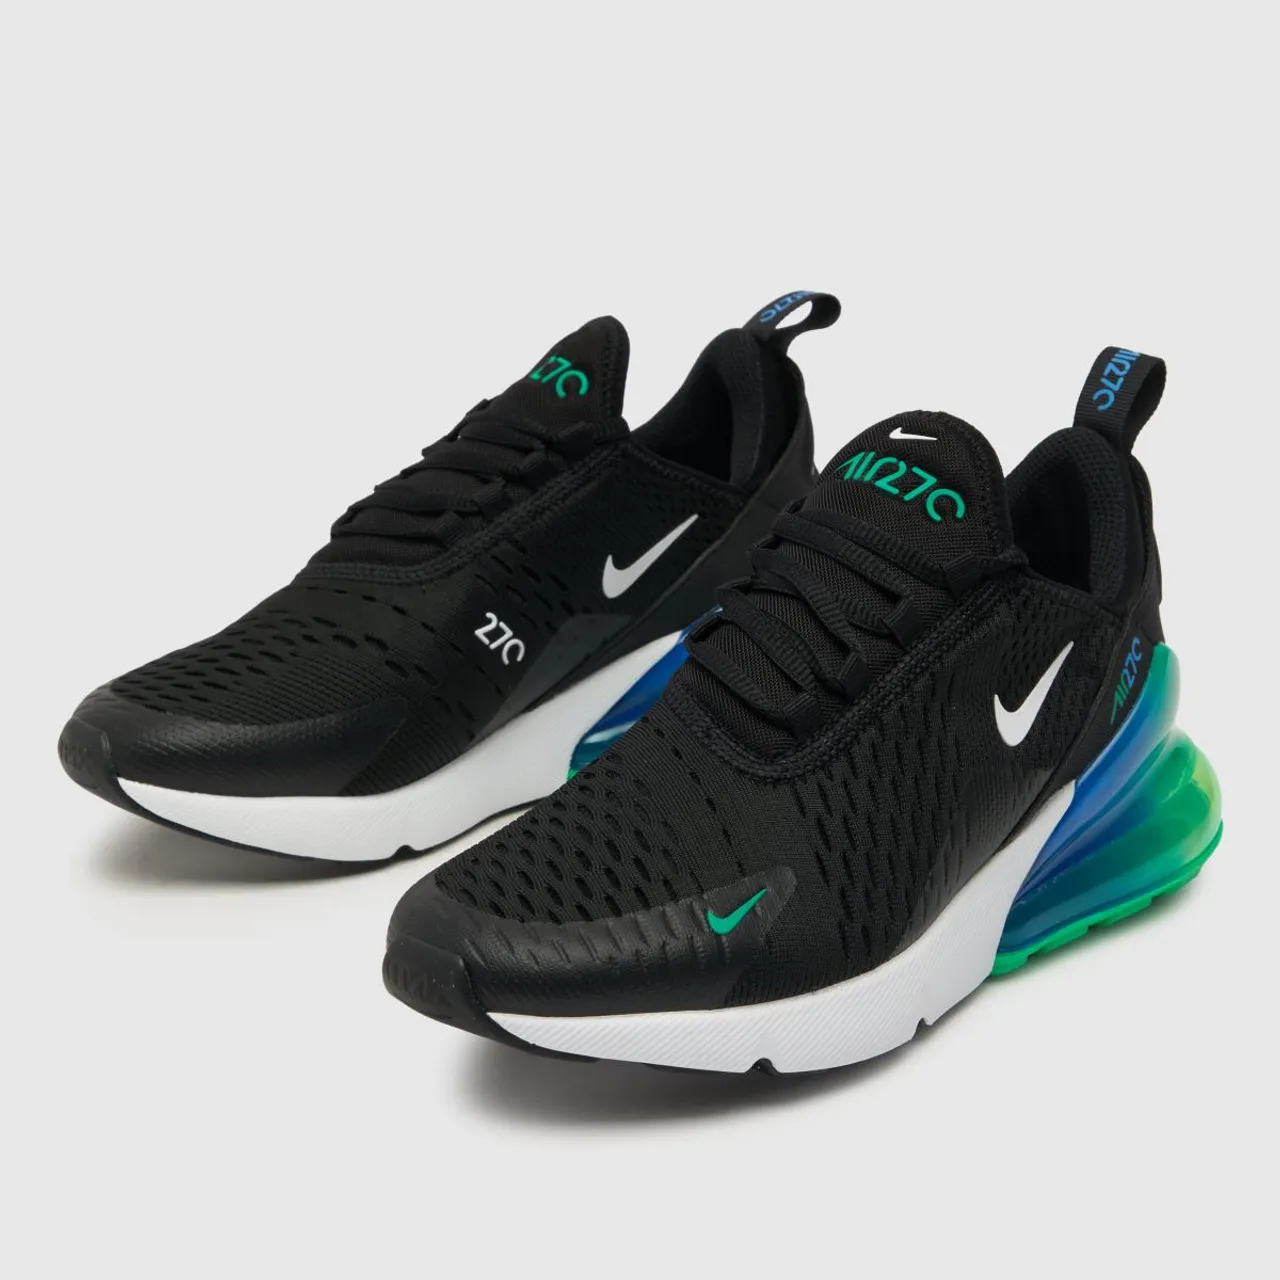 Nike Black & White Air Max 270 Youth Trainers